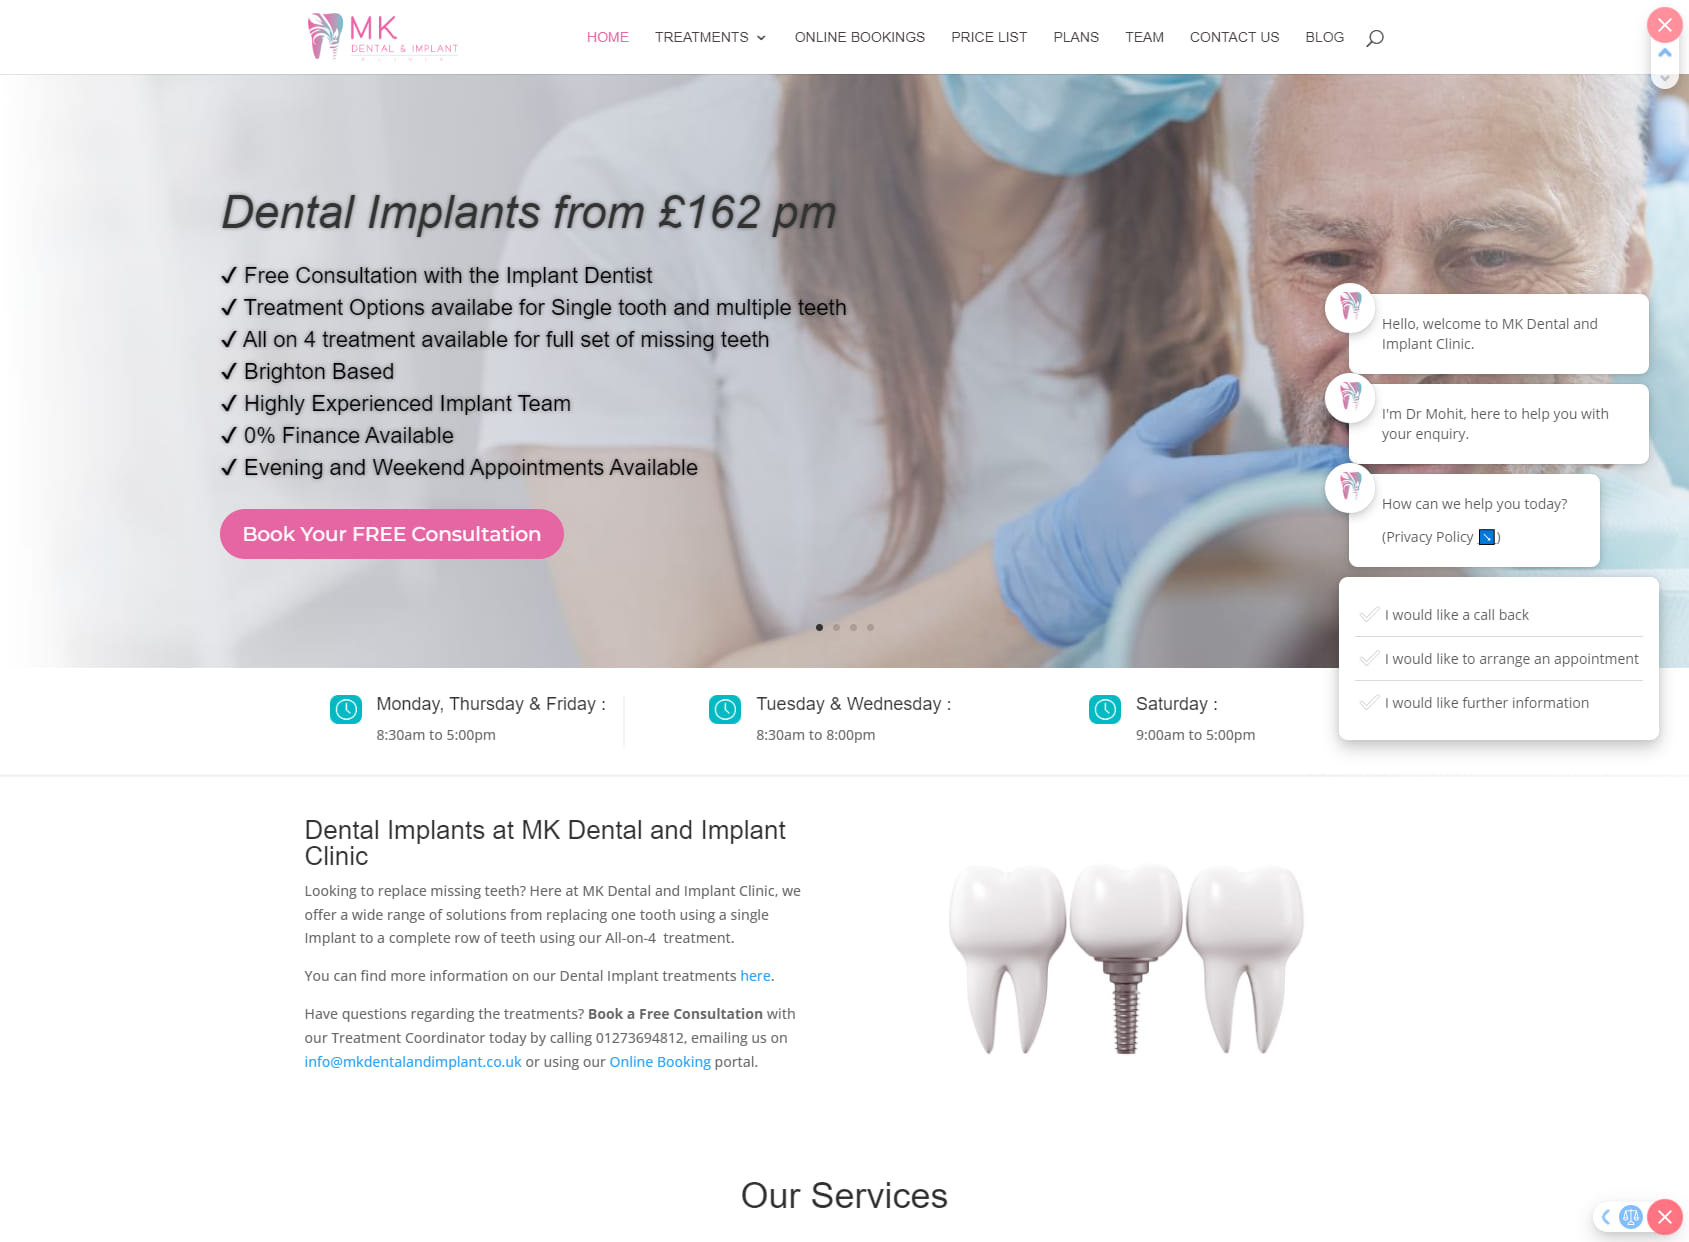 MK Dental and Implant Clinic